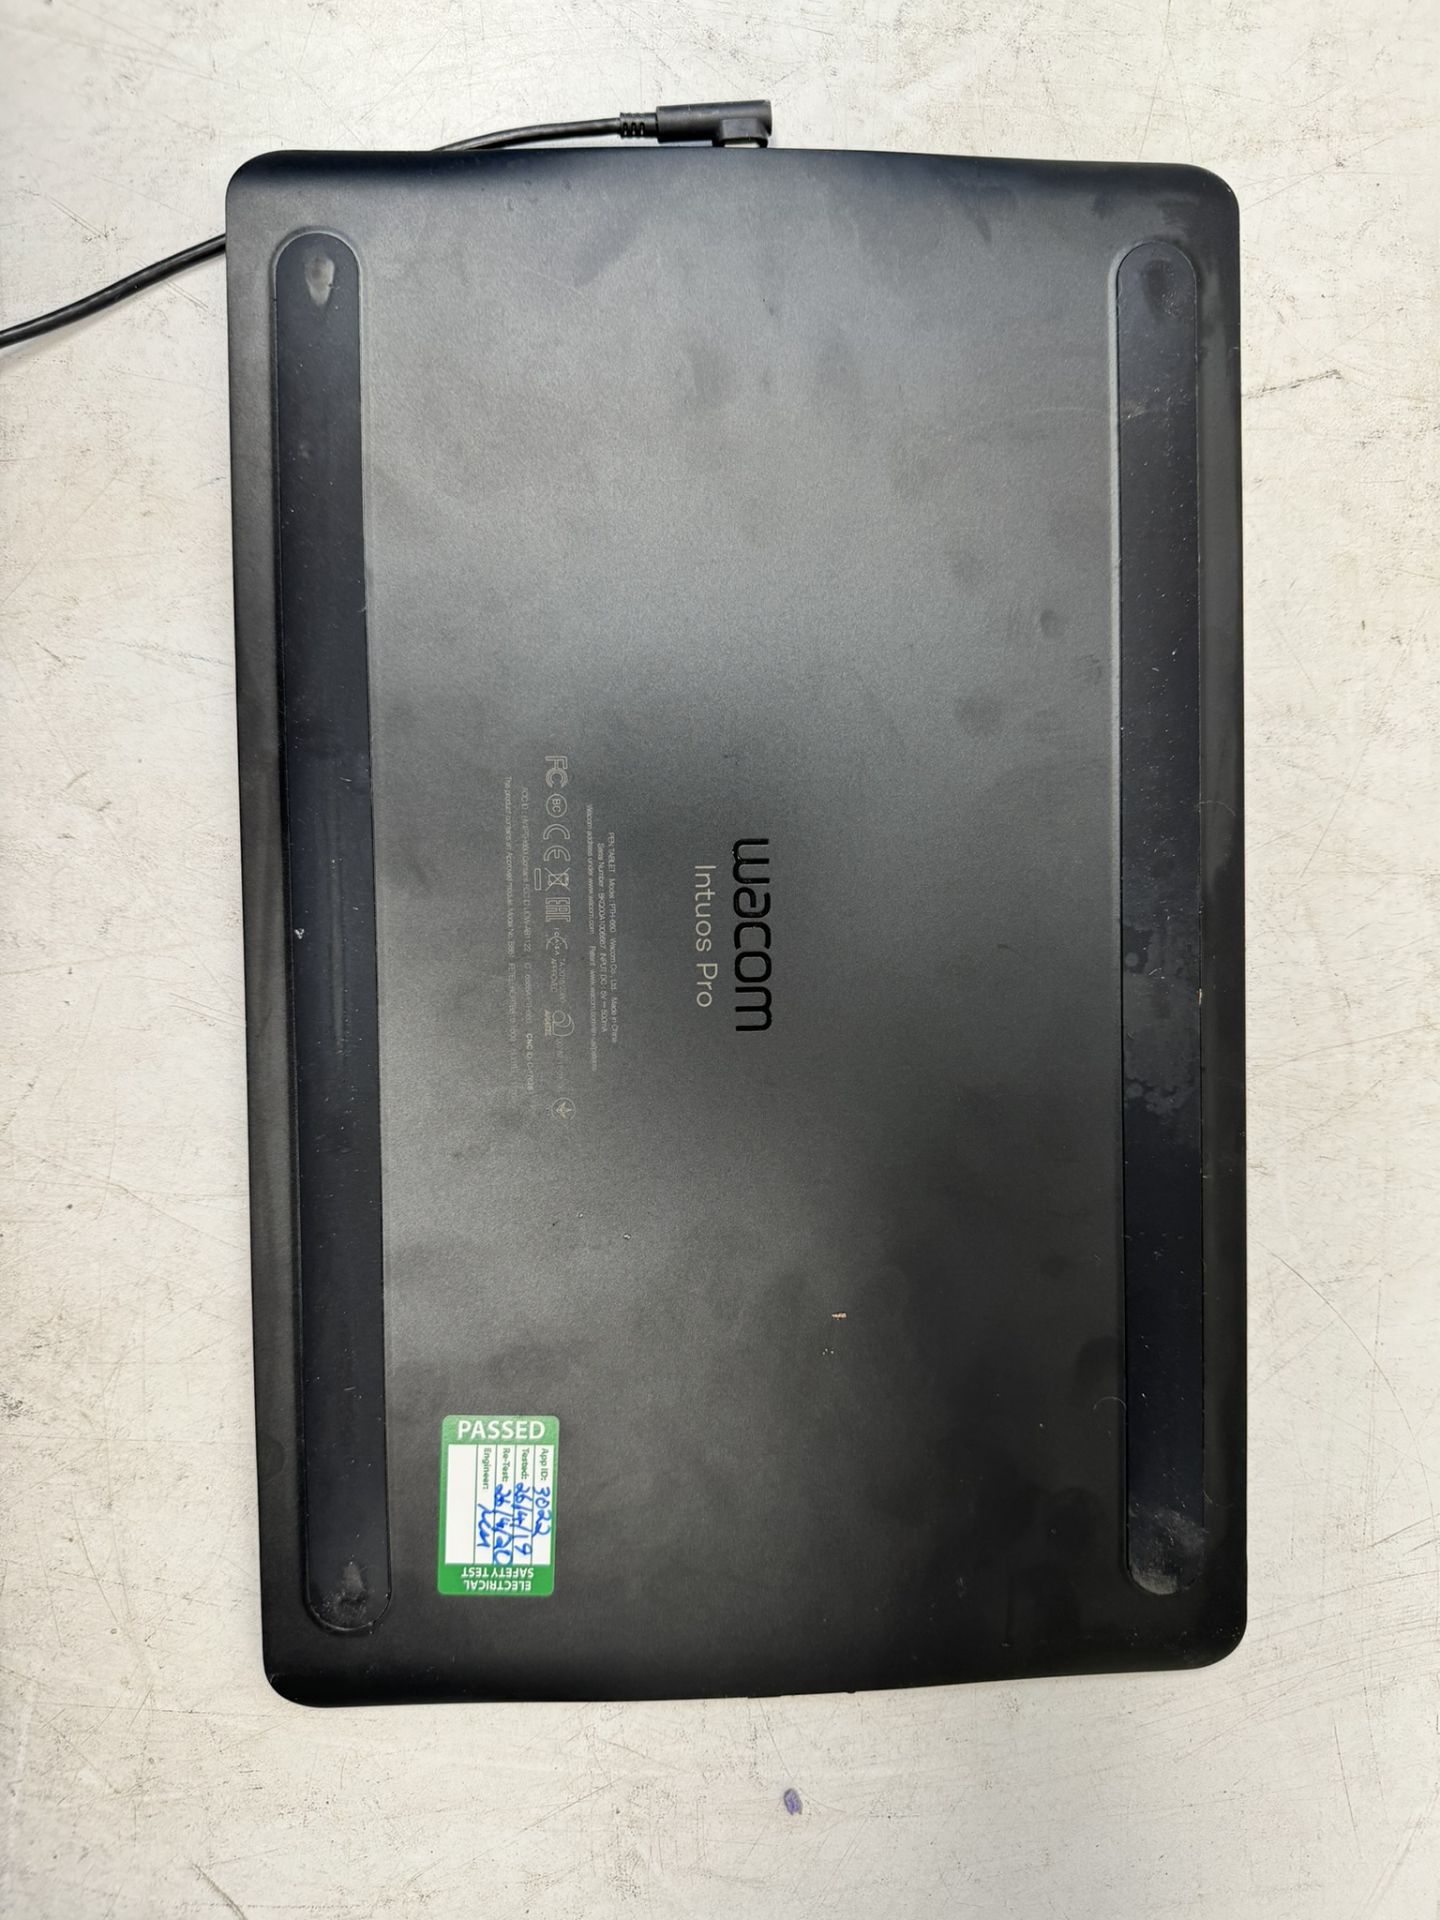 Wacom PTH660 Intuos Pro Digital Graphic Drawing Tablet - Image 2 of 3